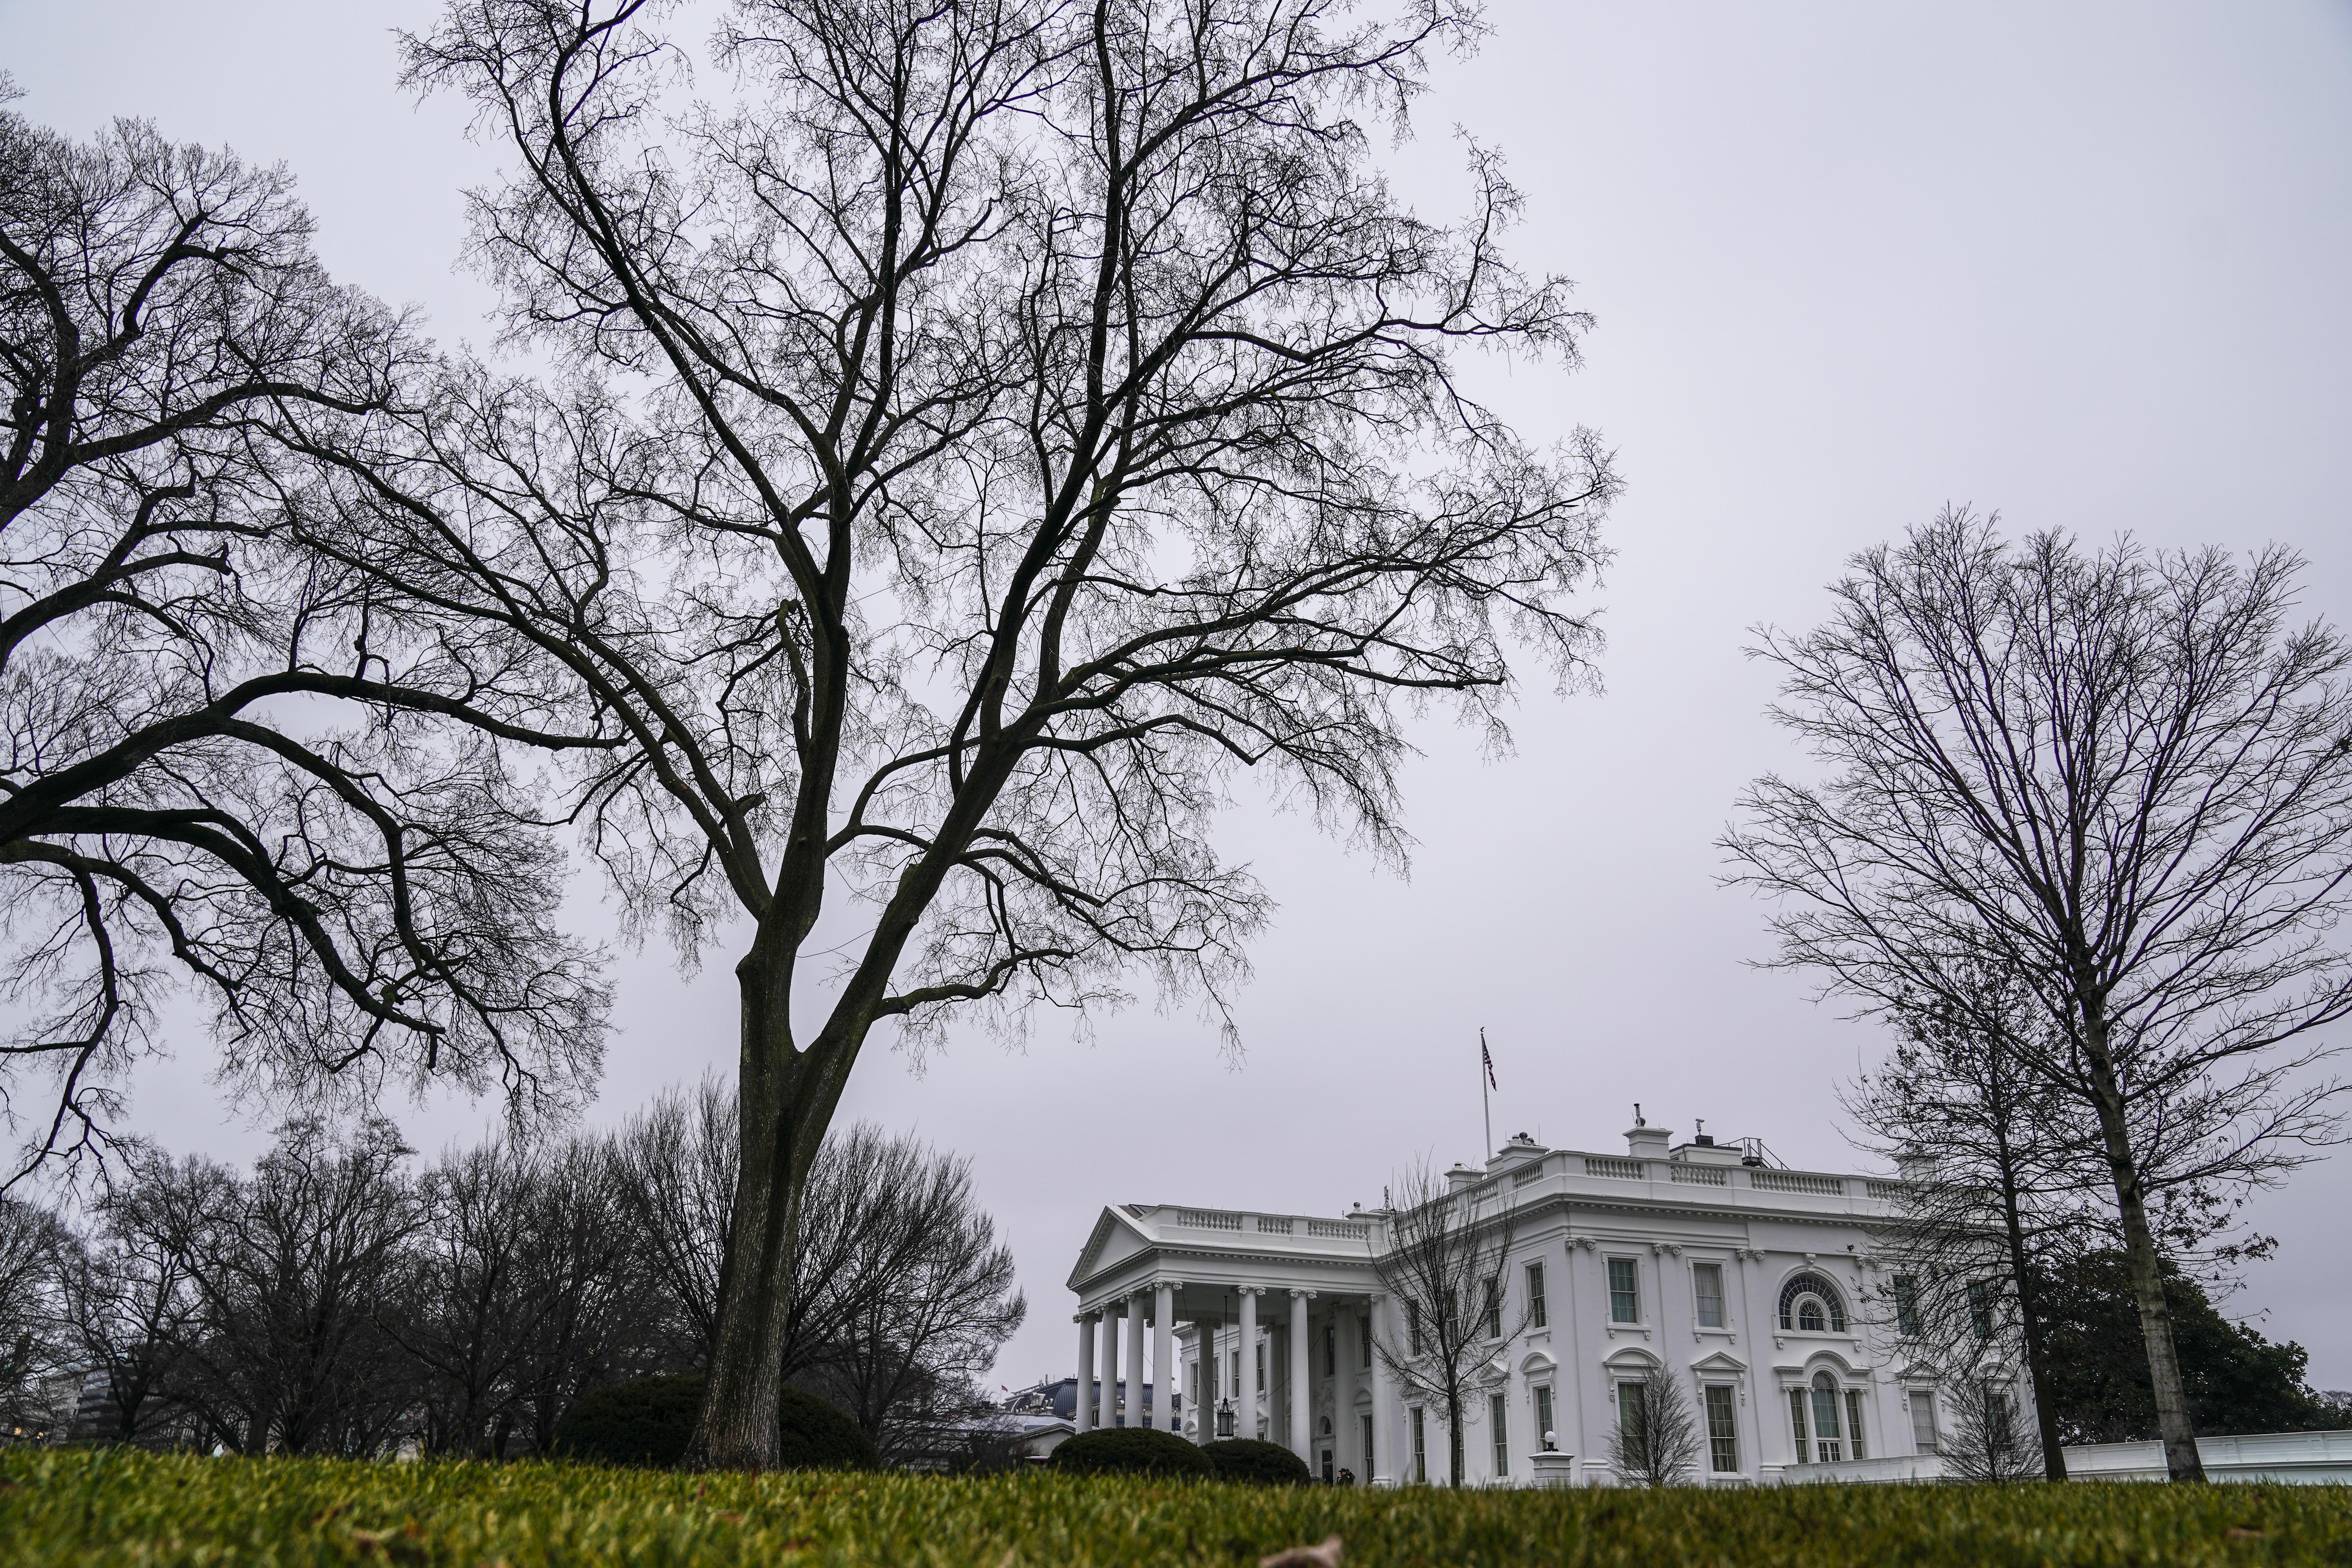 Side view of the White House surrounded by barren trees on a gray, cloudy day